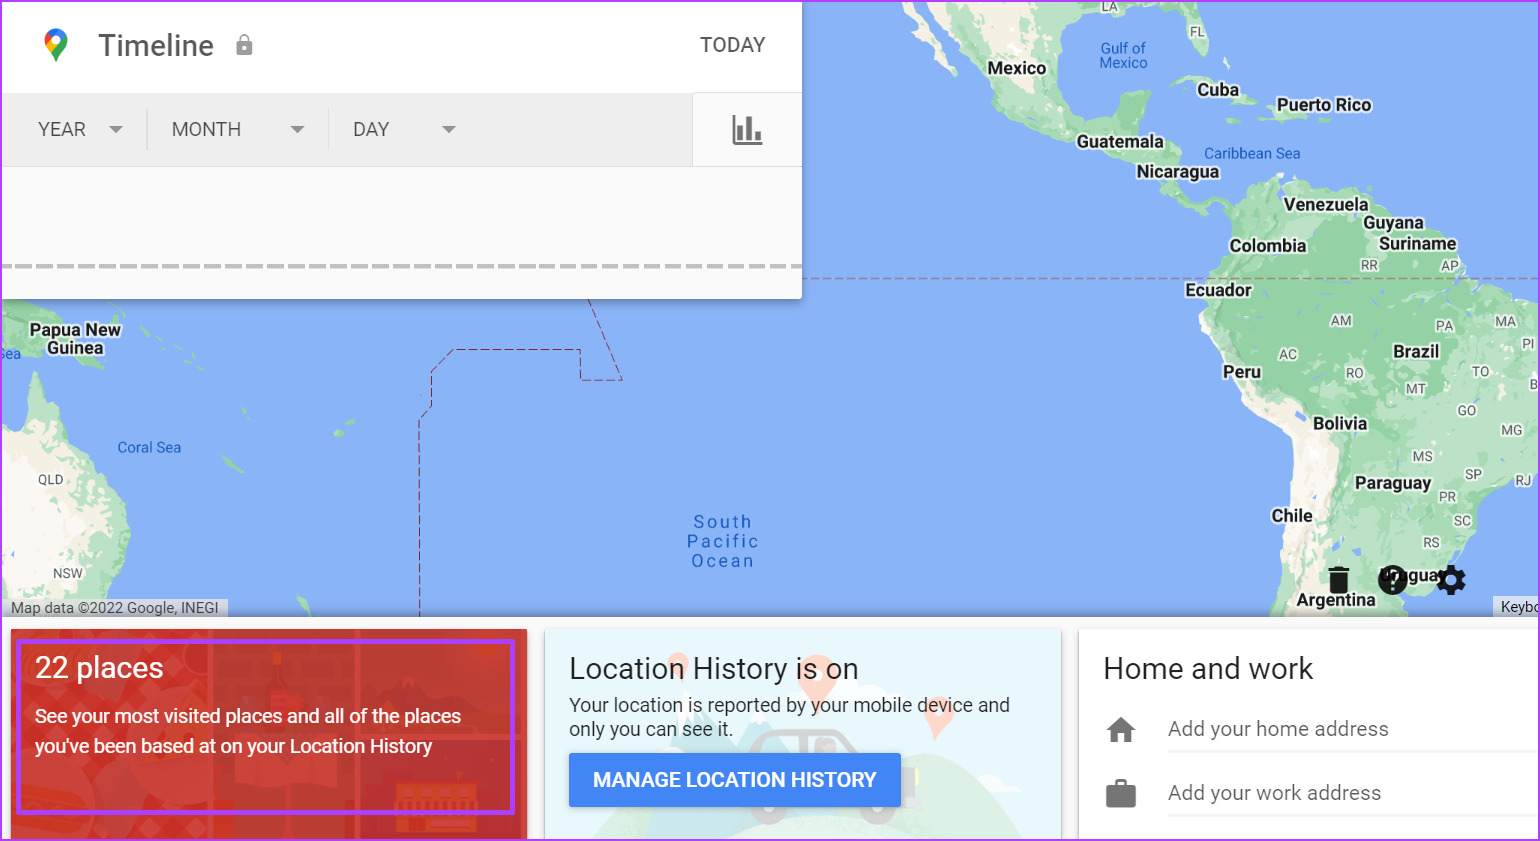 How to Manage the Location History on Your Google Account - 12